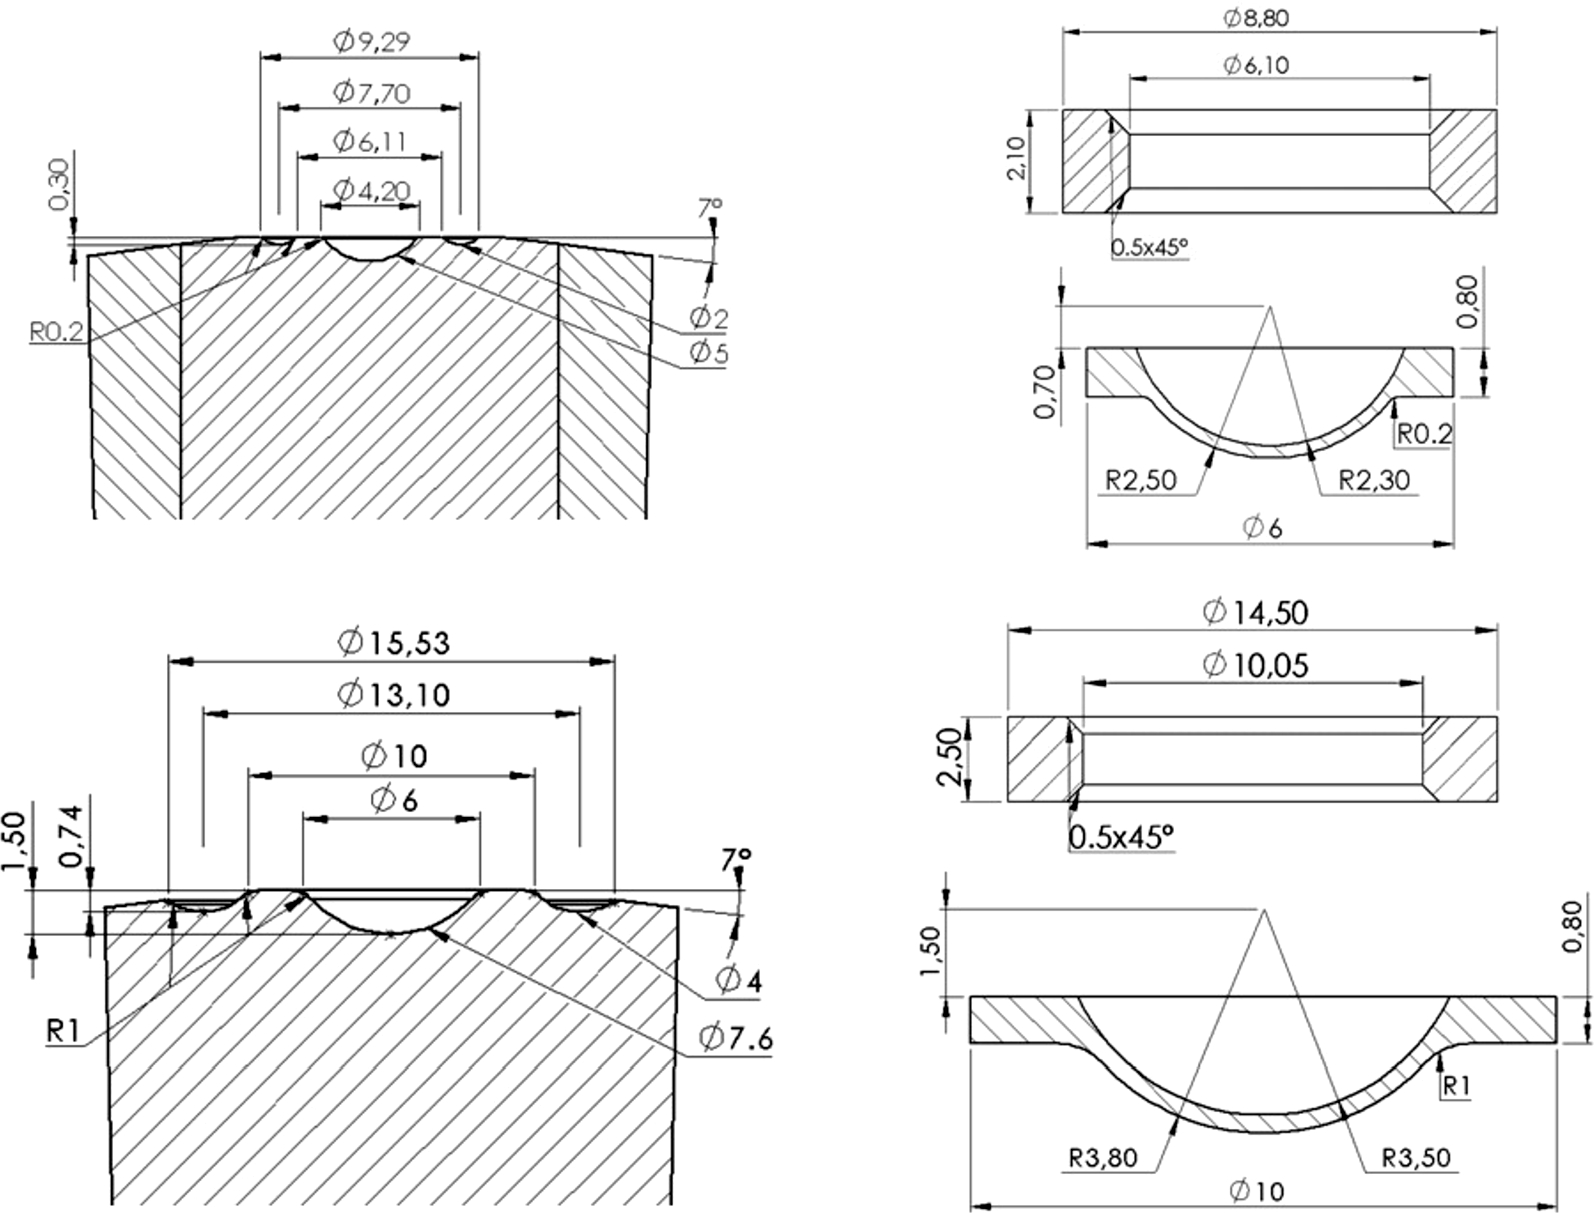 Top row: anvil profile (left) and corresponding gaskets (right) for sintered diamond anvils presented in this work (“SD SINE anvils”). Bottom row: standard single-toroidal profile & gaskets for comparison.